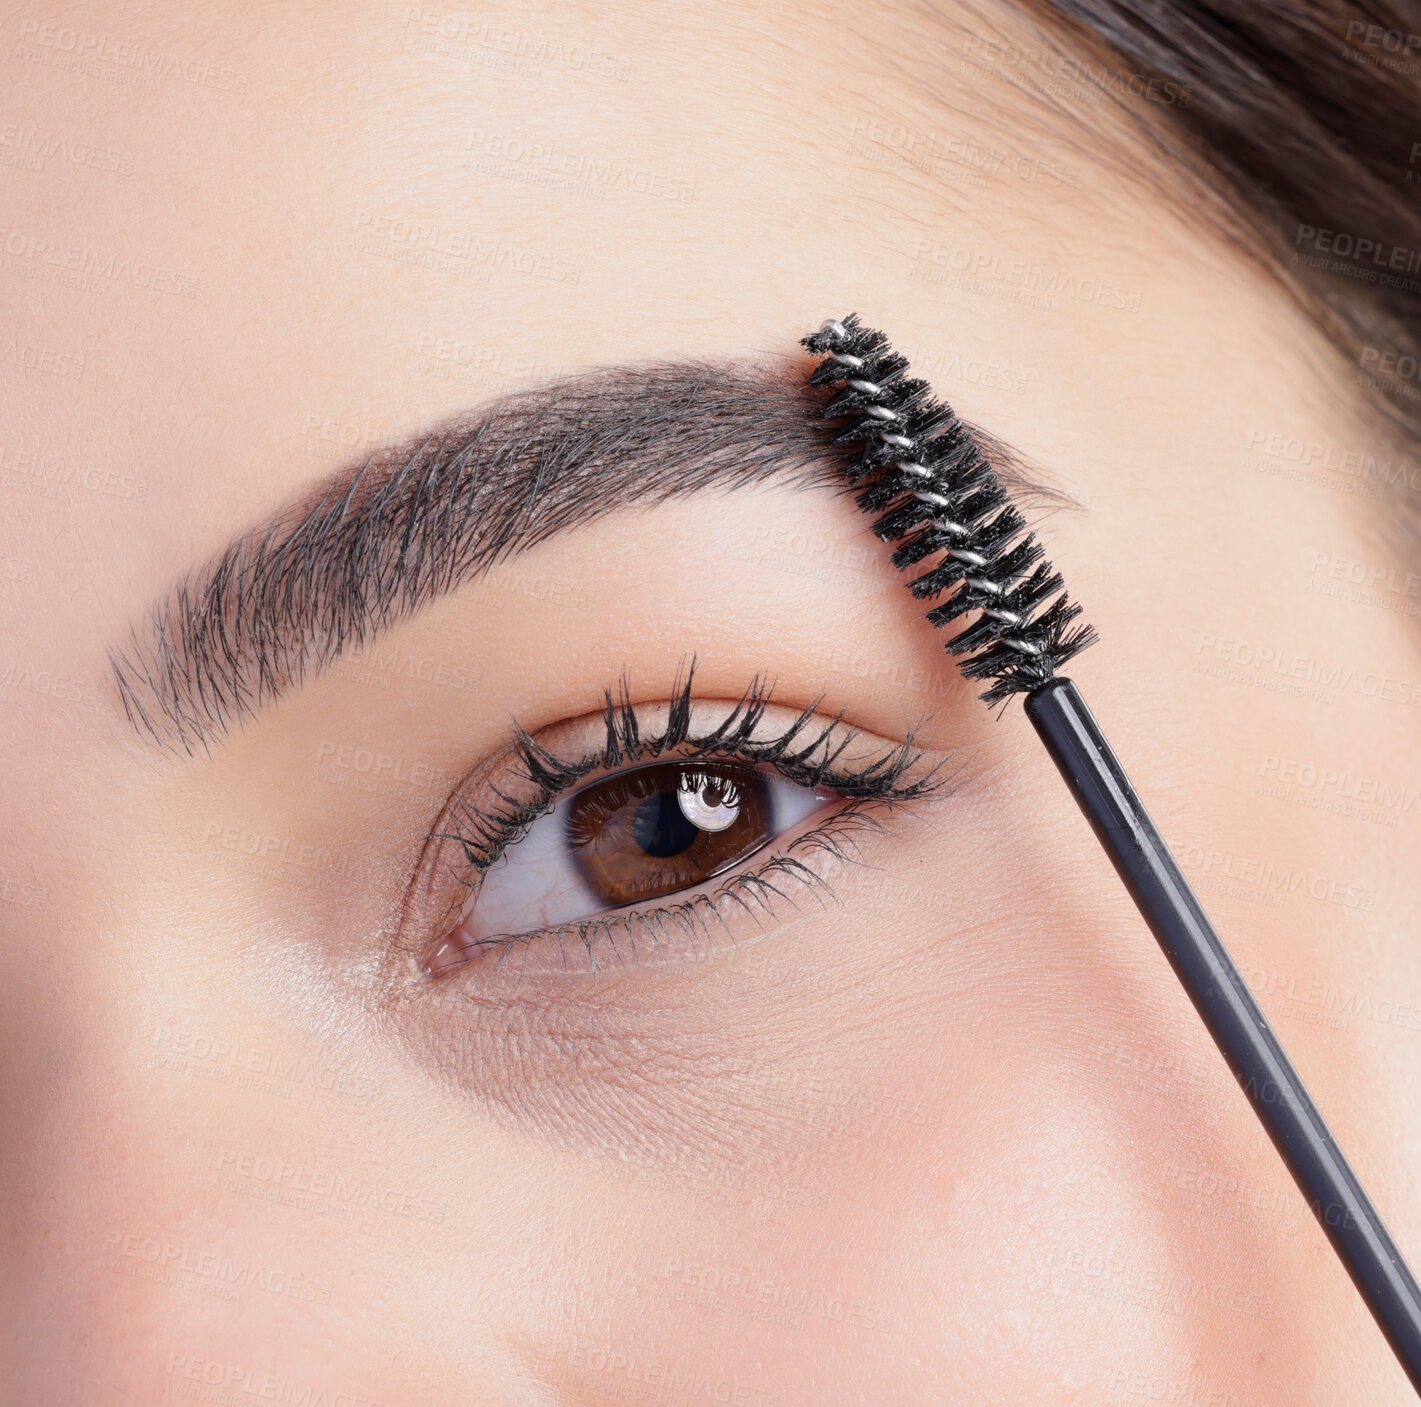 Buy stock photo Closeup portrait of an attractive young woman apllying eyebrow makeup in studio against a grey background